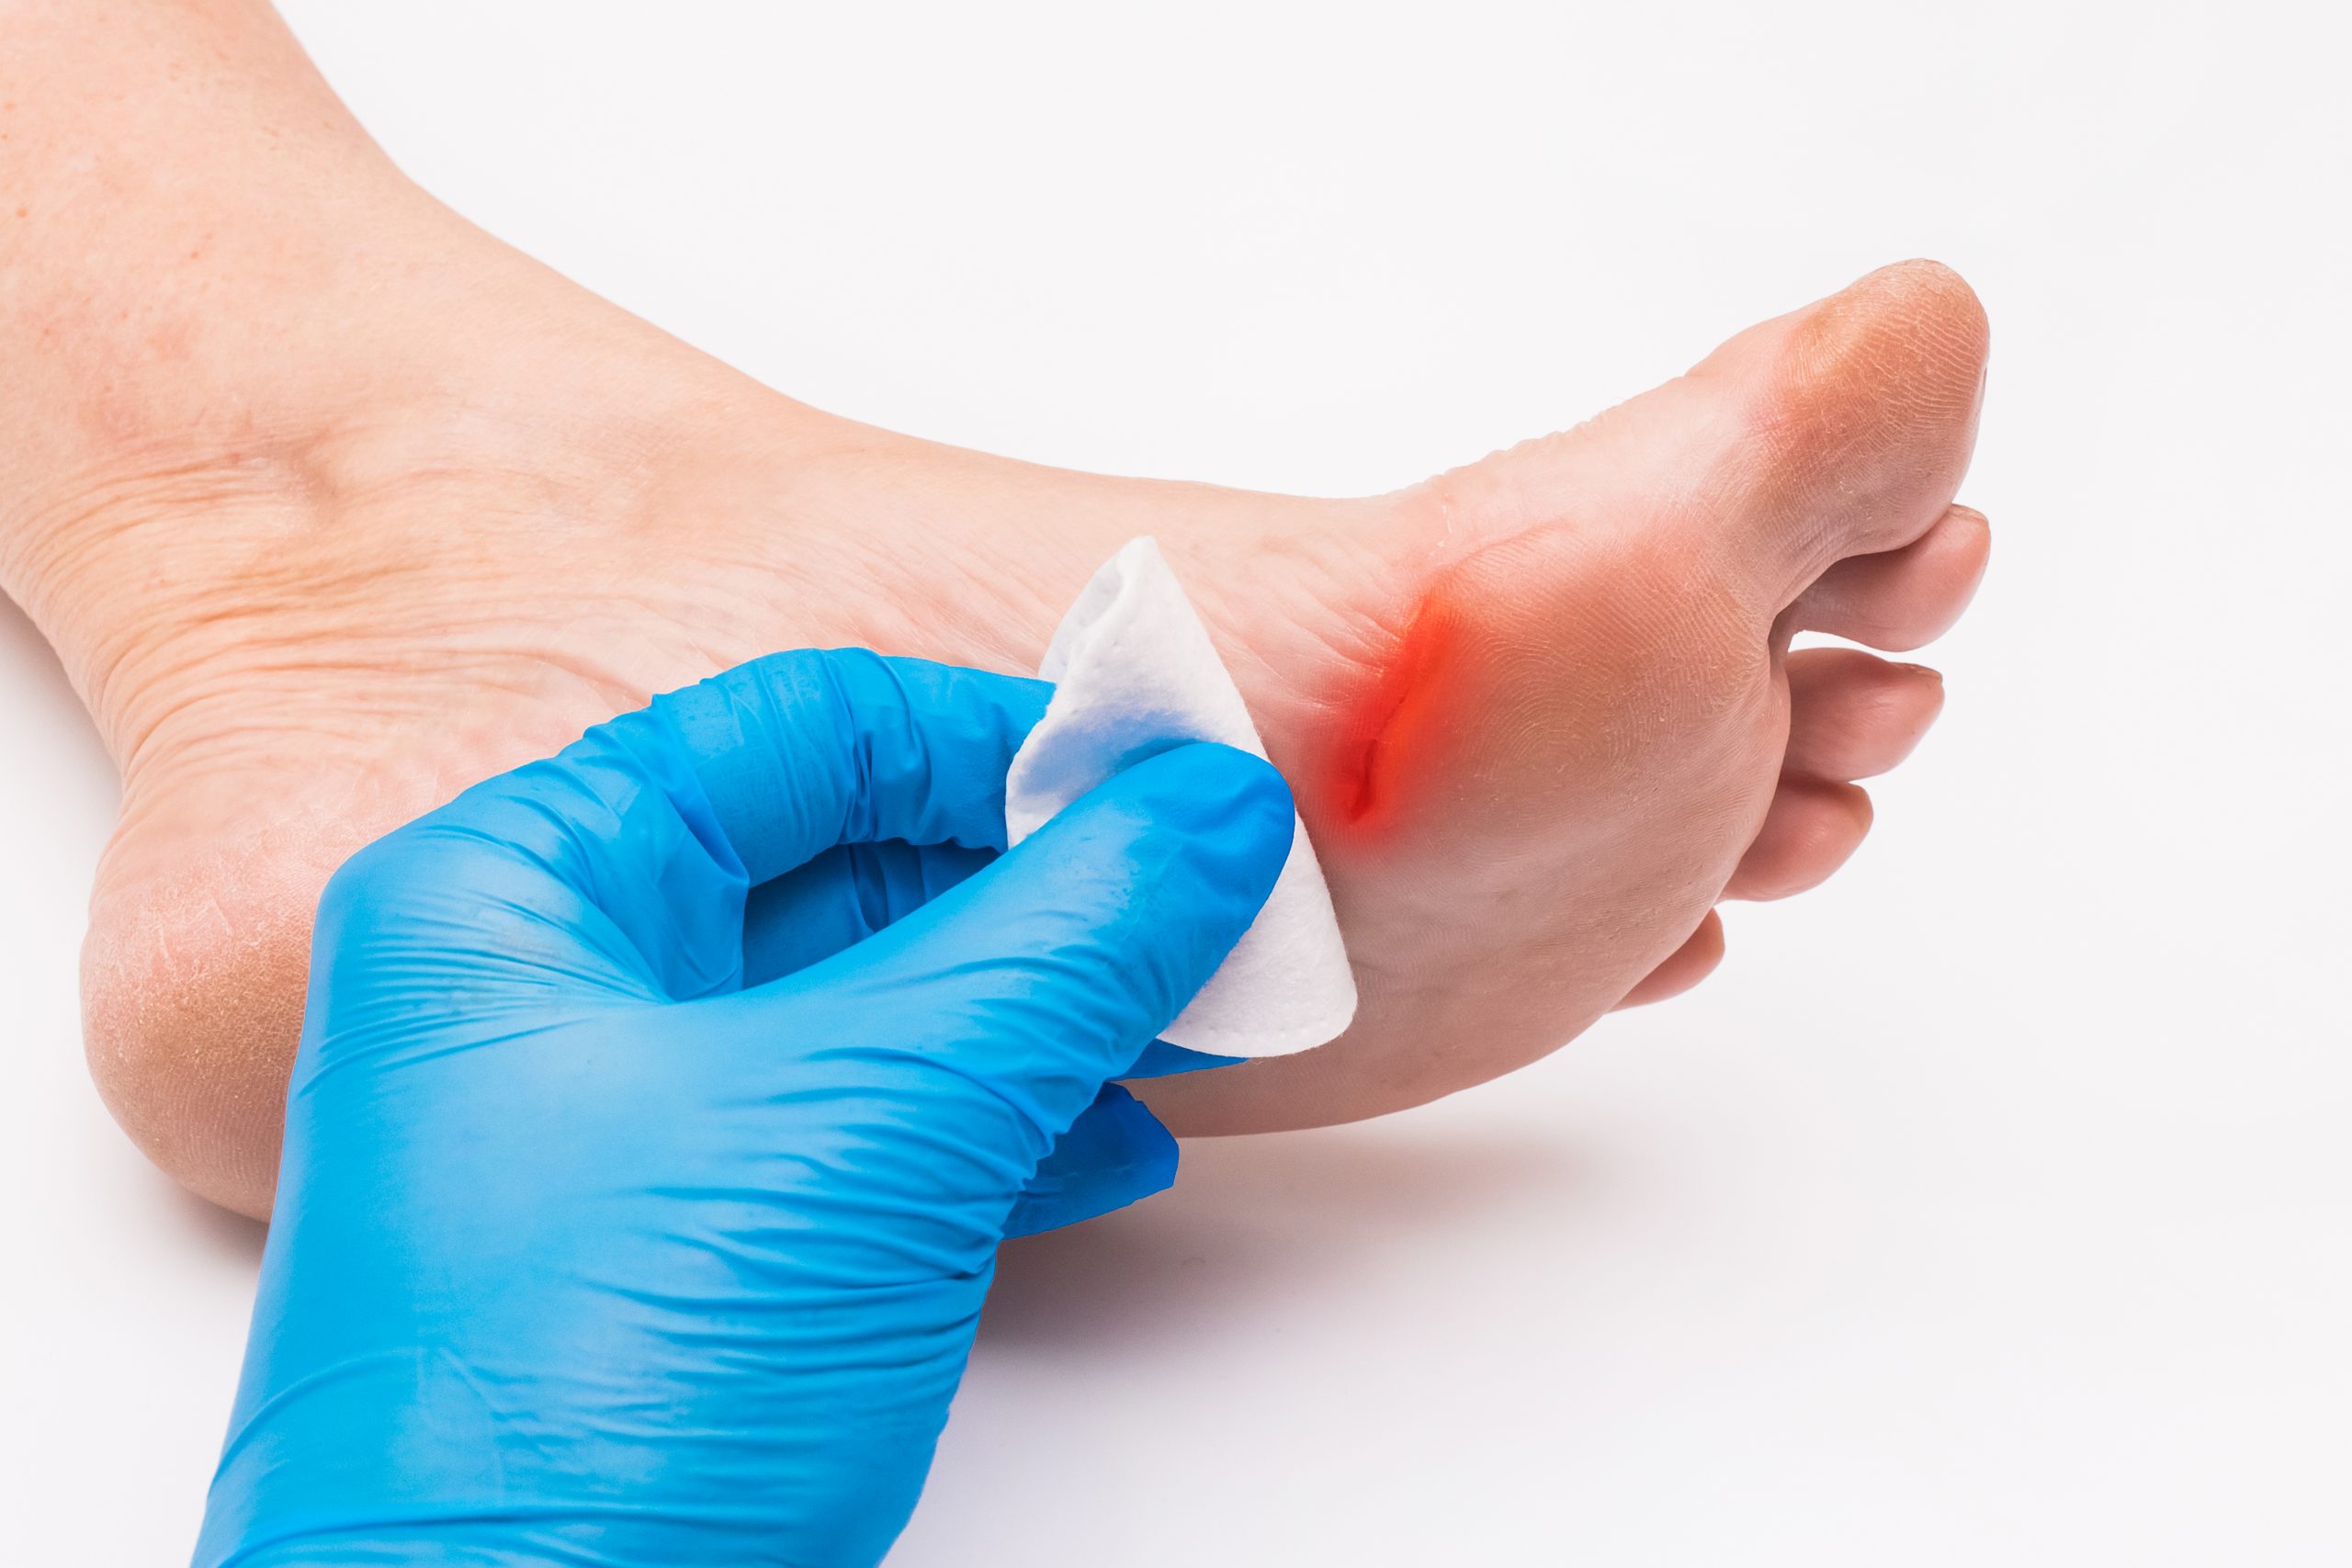 Can a podiatrist help you with diabetic foot care?